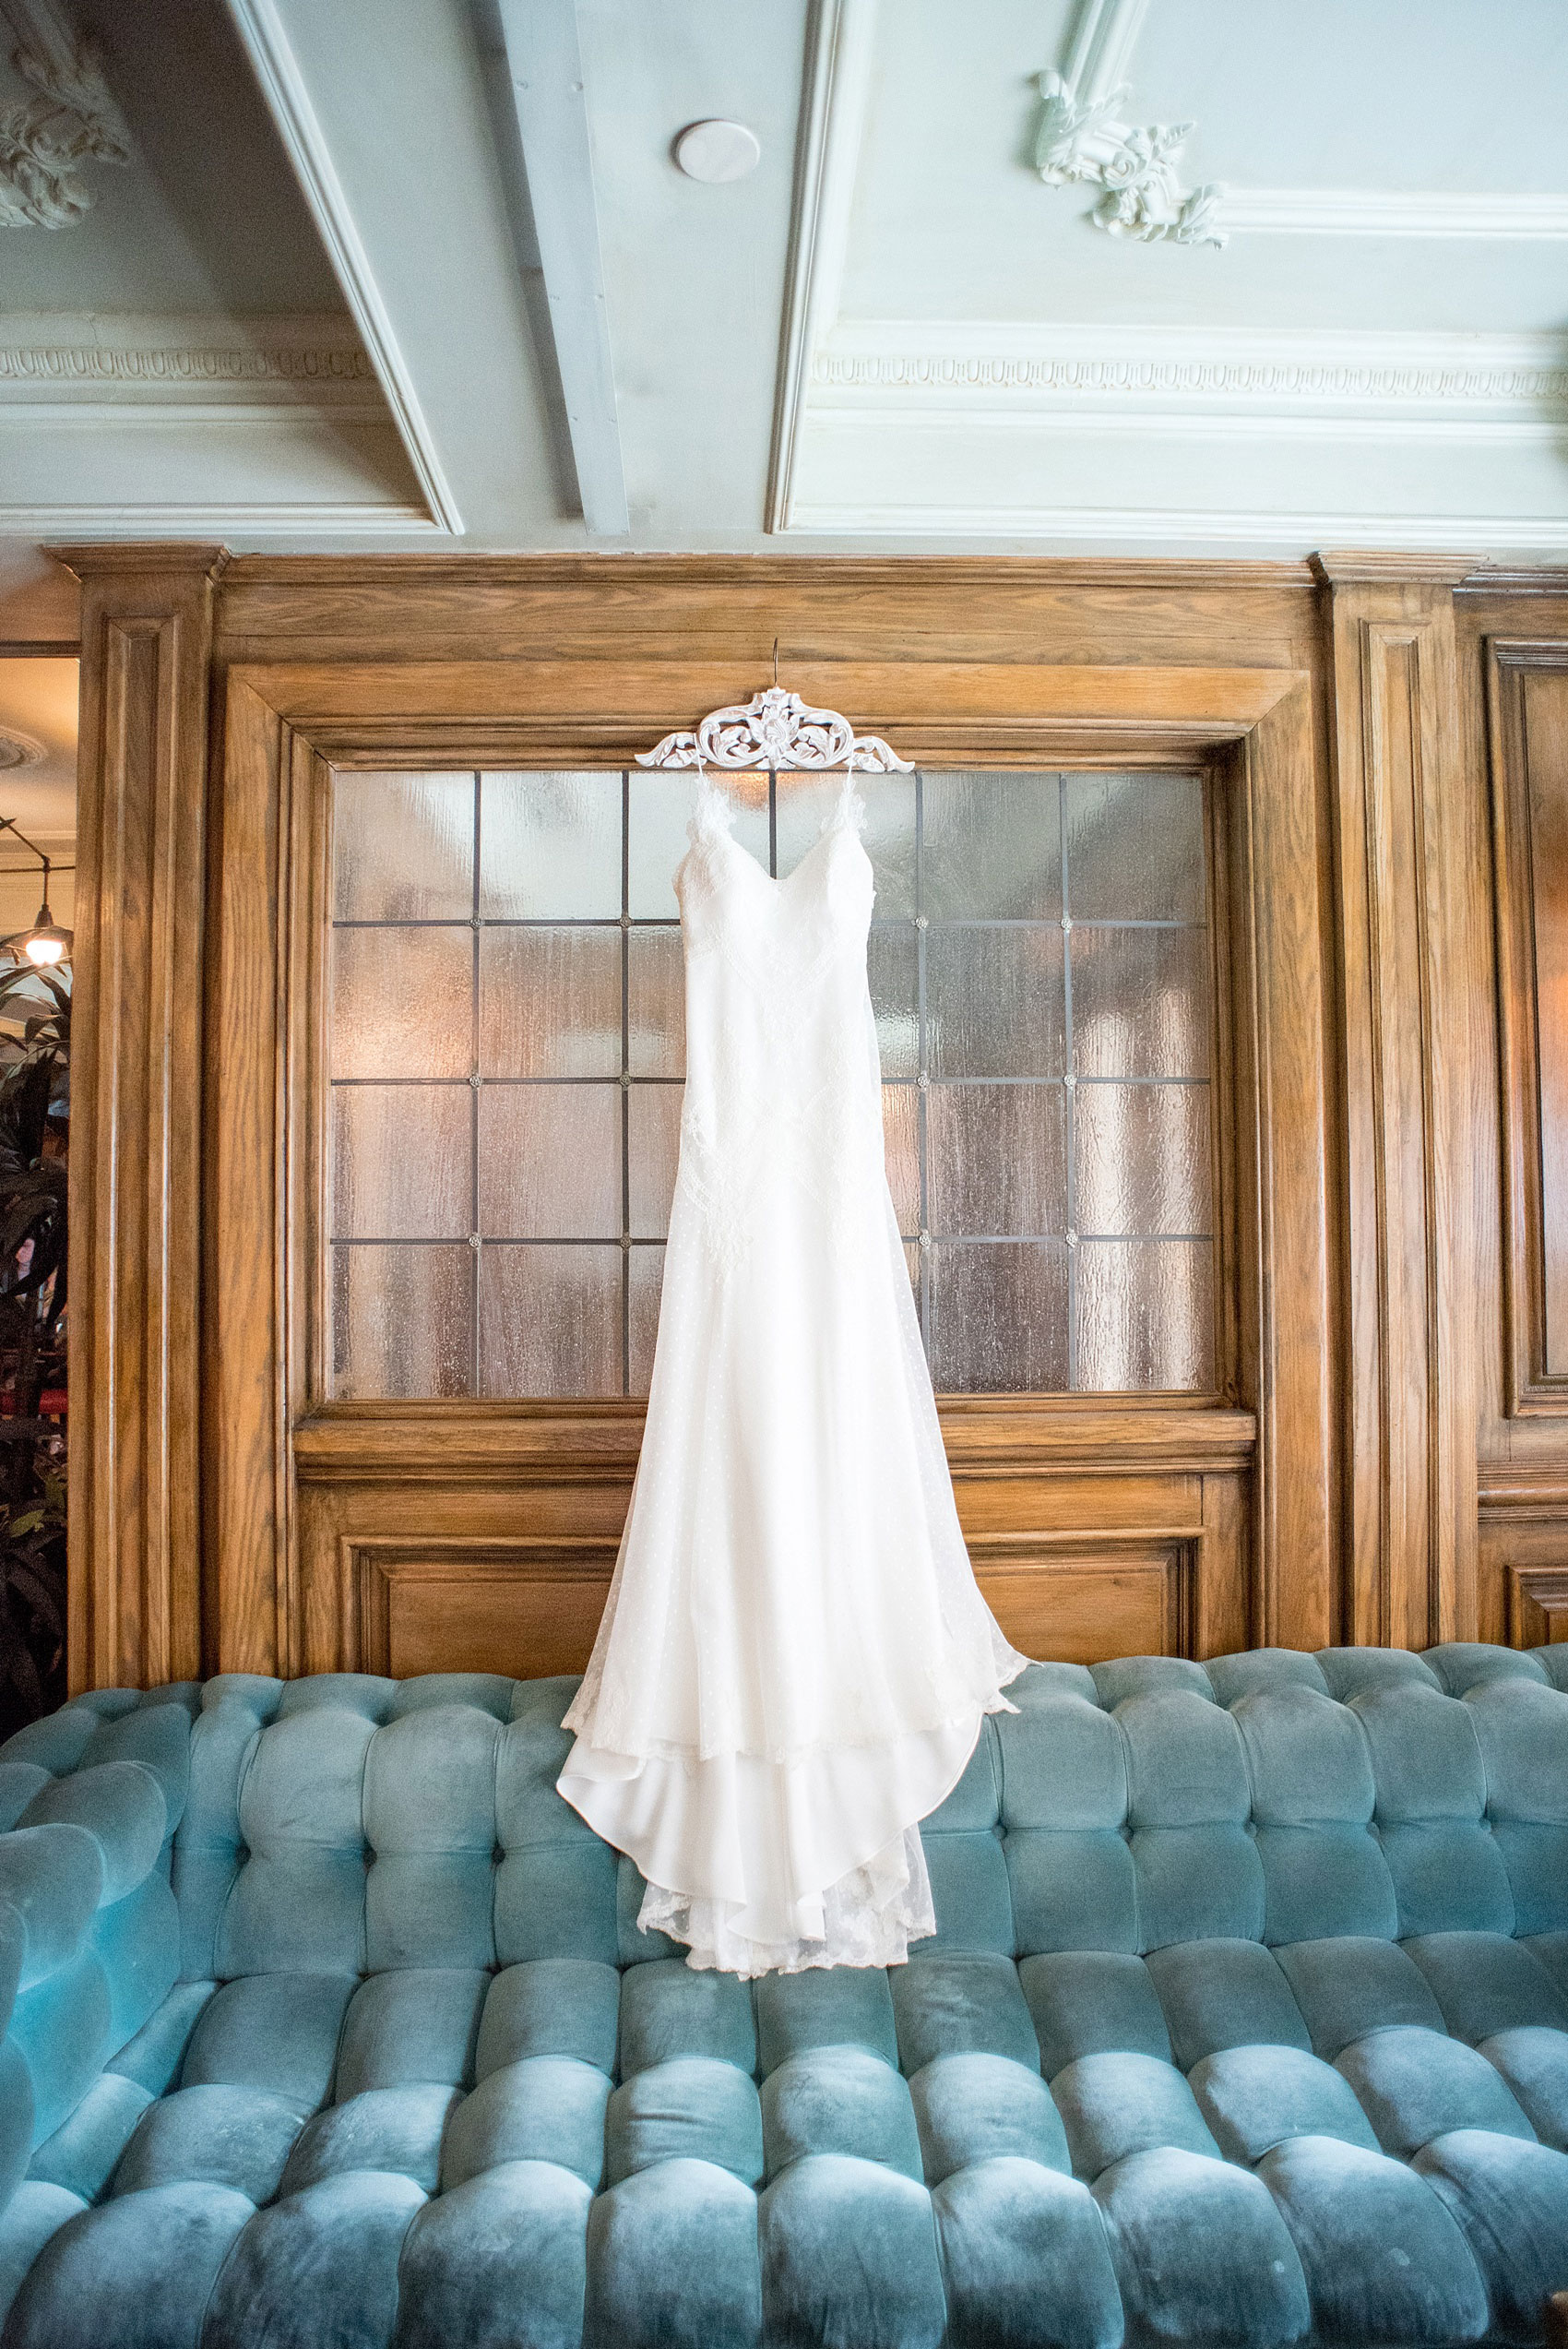 Mikkel Paige Photography captures a luxury wedding in NYC. The bride's David Fielden wedding gown hangs in the lobby of The Marlton Hotel.